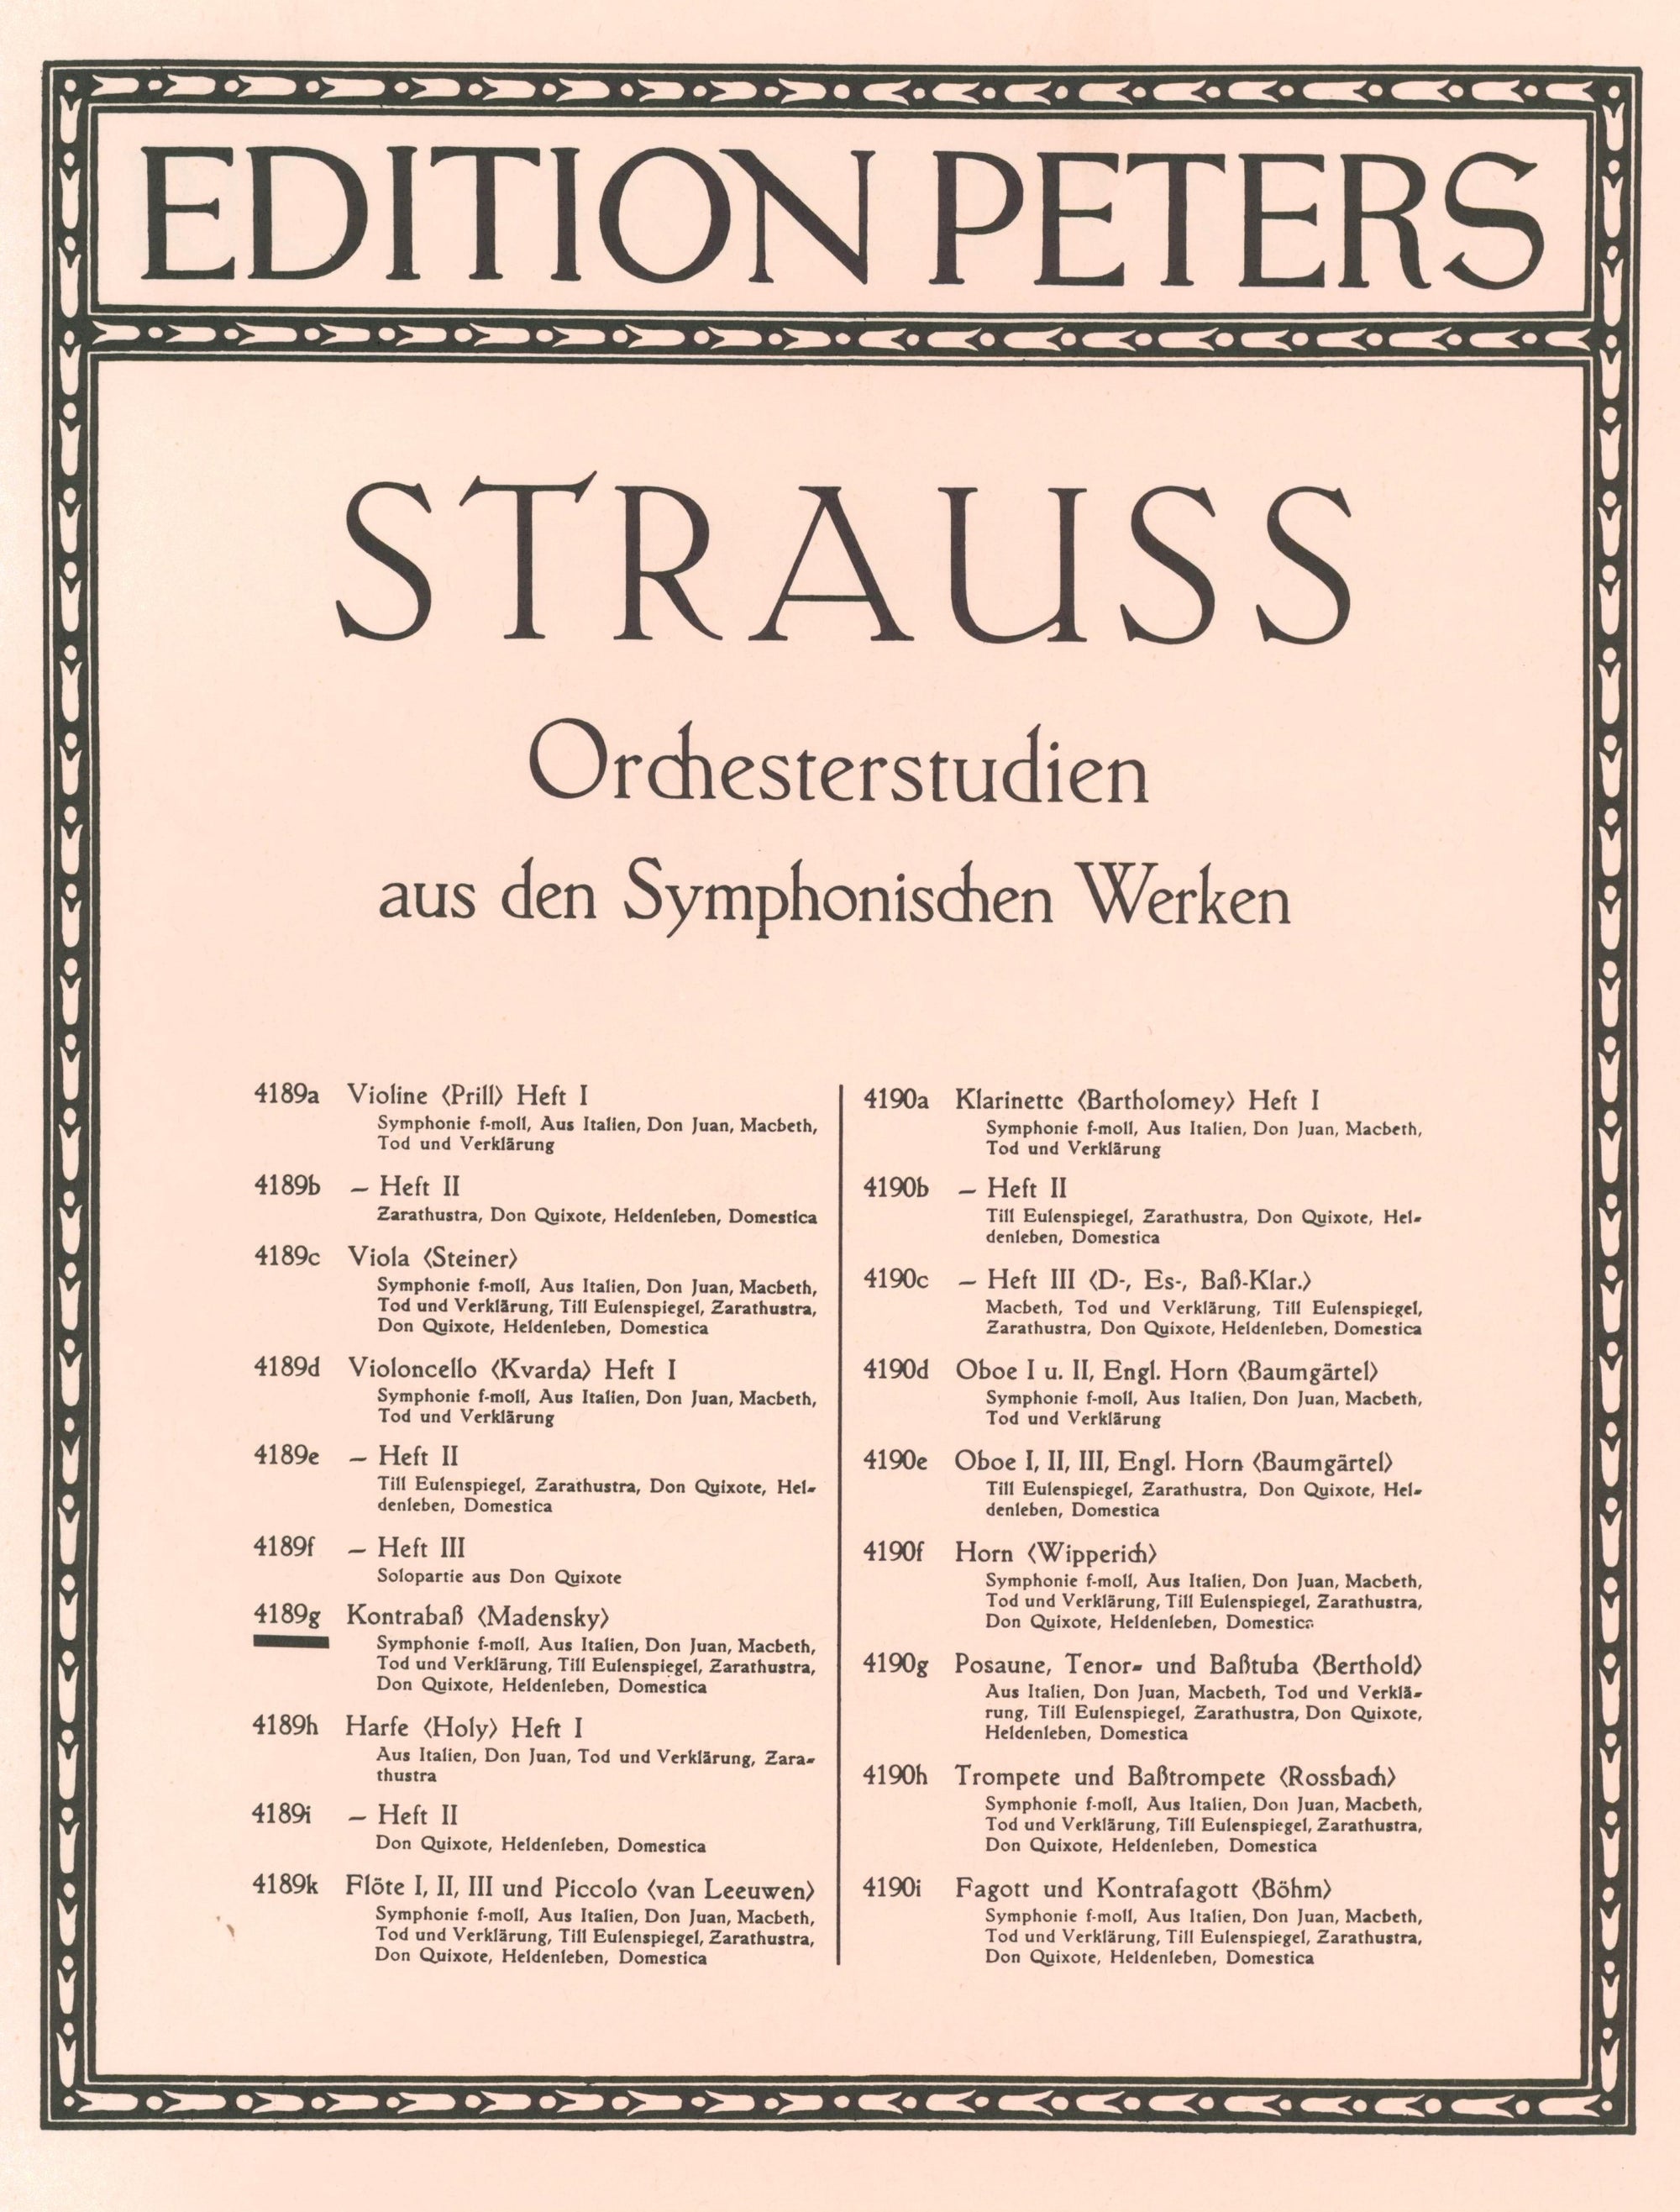 Strauss: Orchestral Excerpts from Symphonic Works for Double Bass